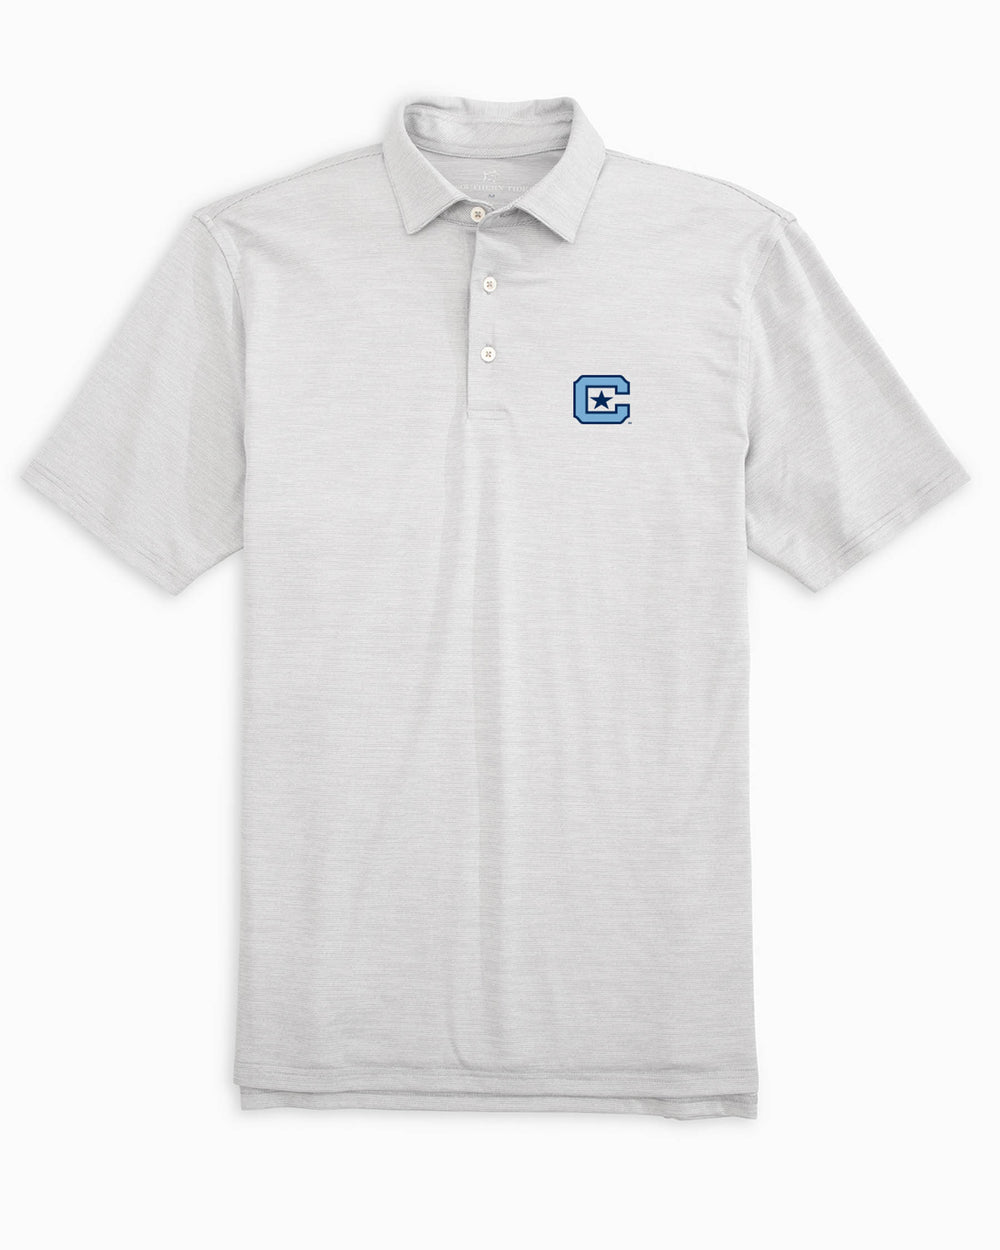 The front of the Citadel Bulldogs Driver Spacedye Performance Polo Shirt by Southern Tide - Slate Grey